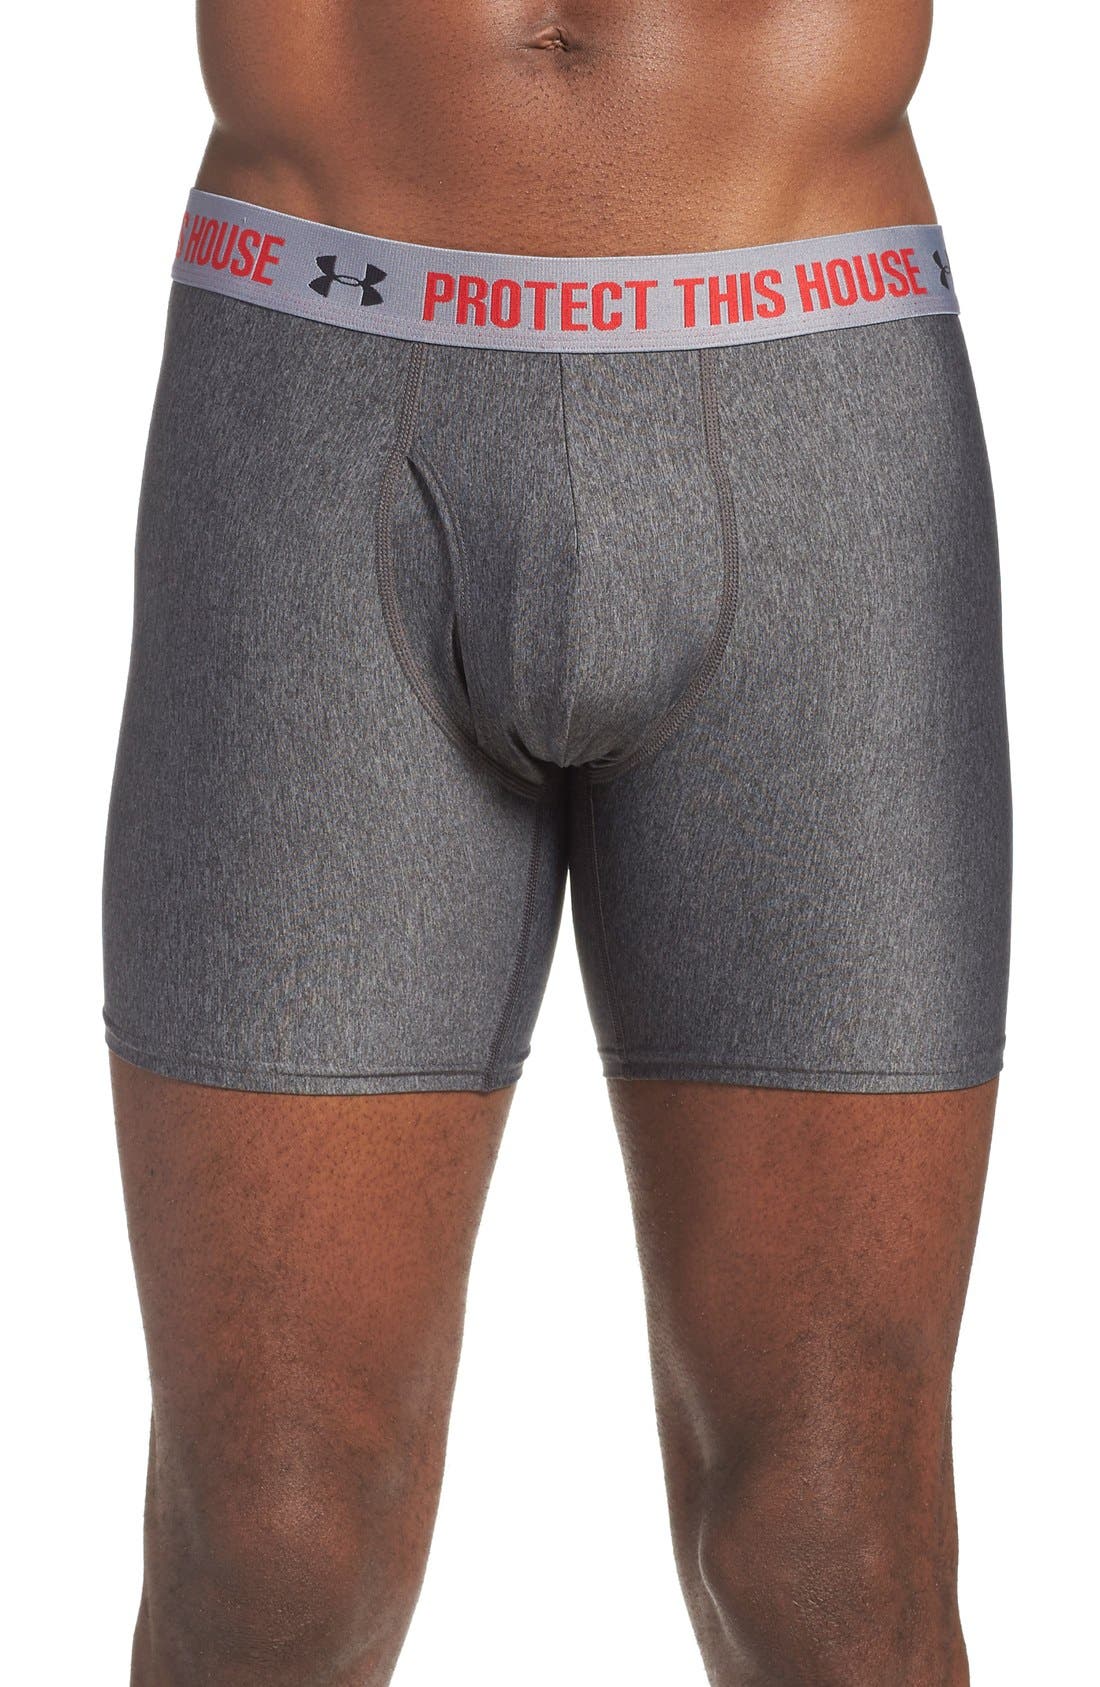 under armour heat gear boxers